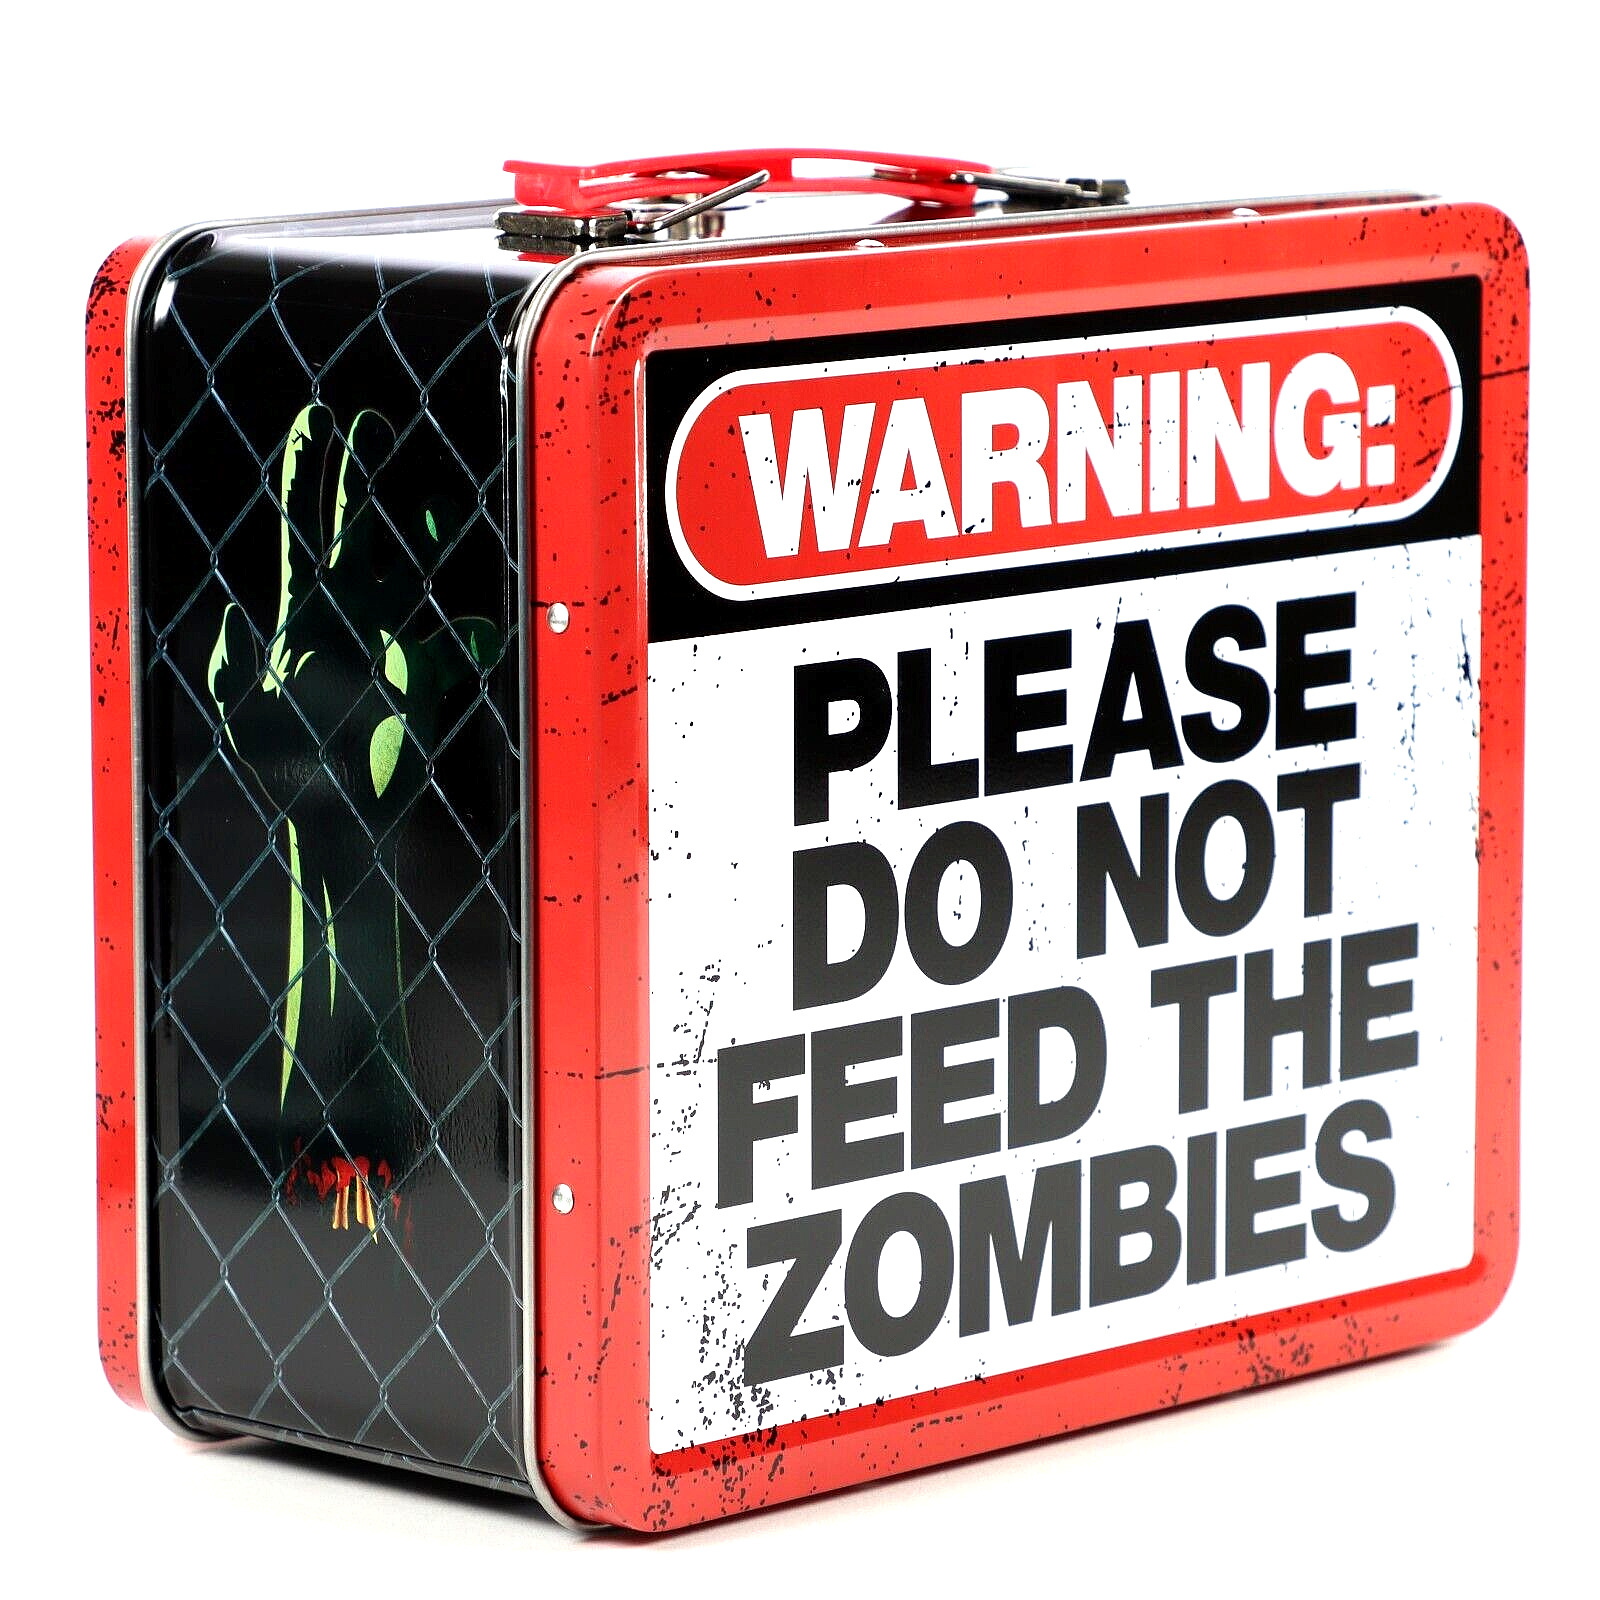 Zombie Warning Please Do Not Feed The Zombies Metal Tin Tote Lunch Box Aquarius